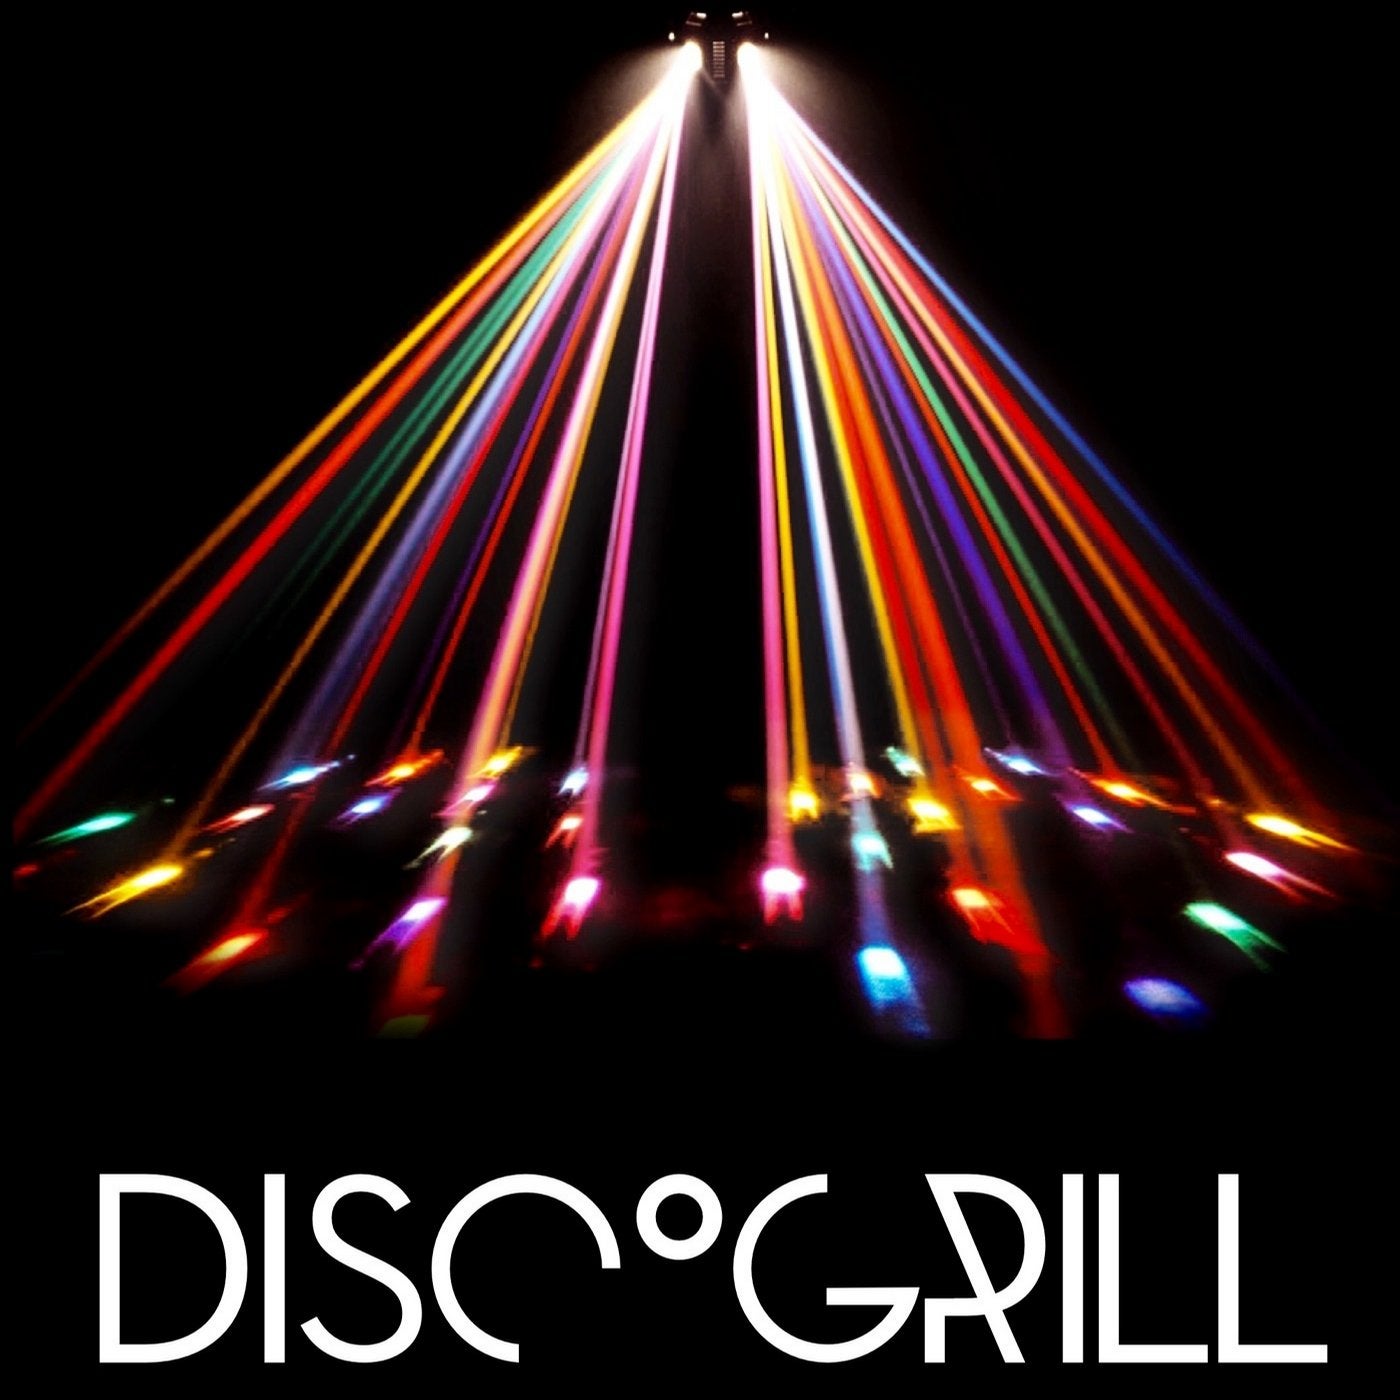 Discogrill